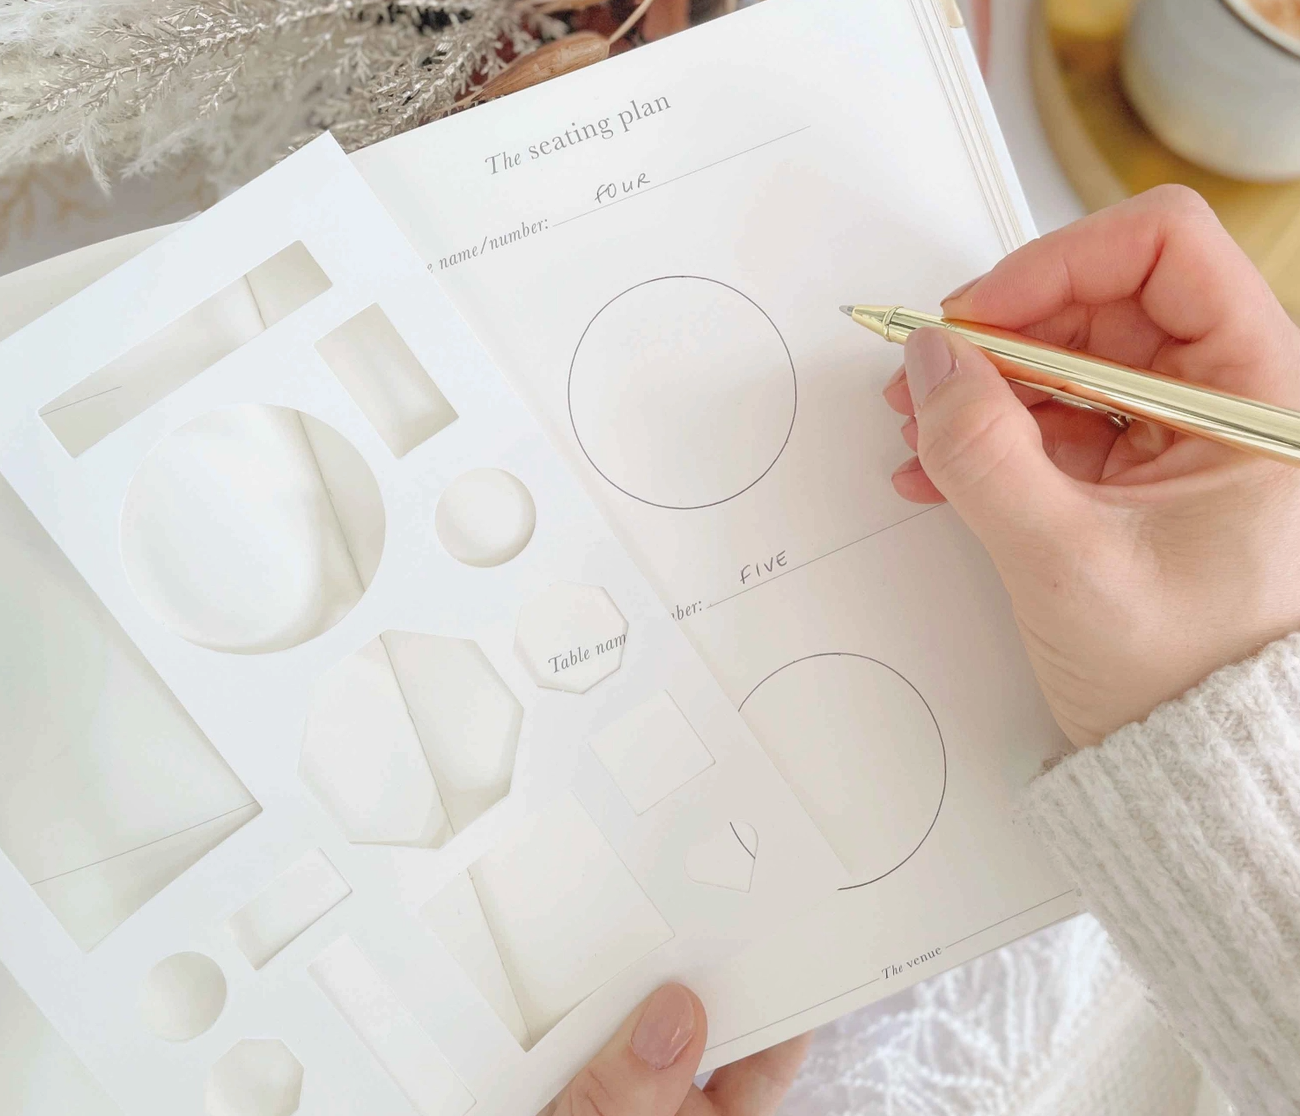 Glamorous wedding planning made easy with this gold-covered book.